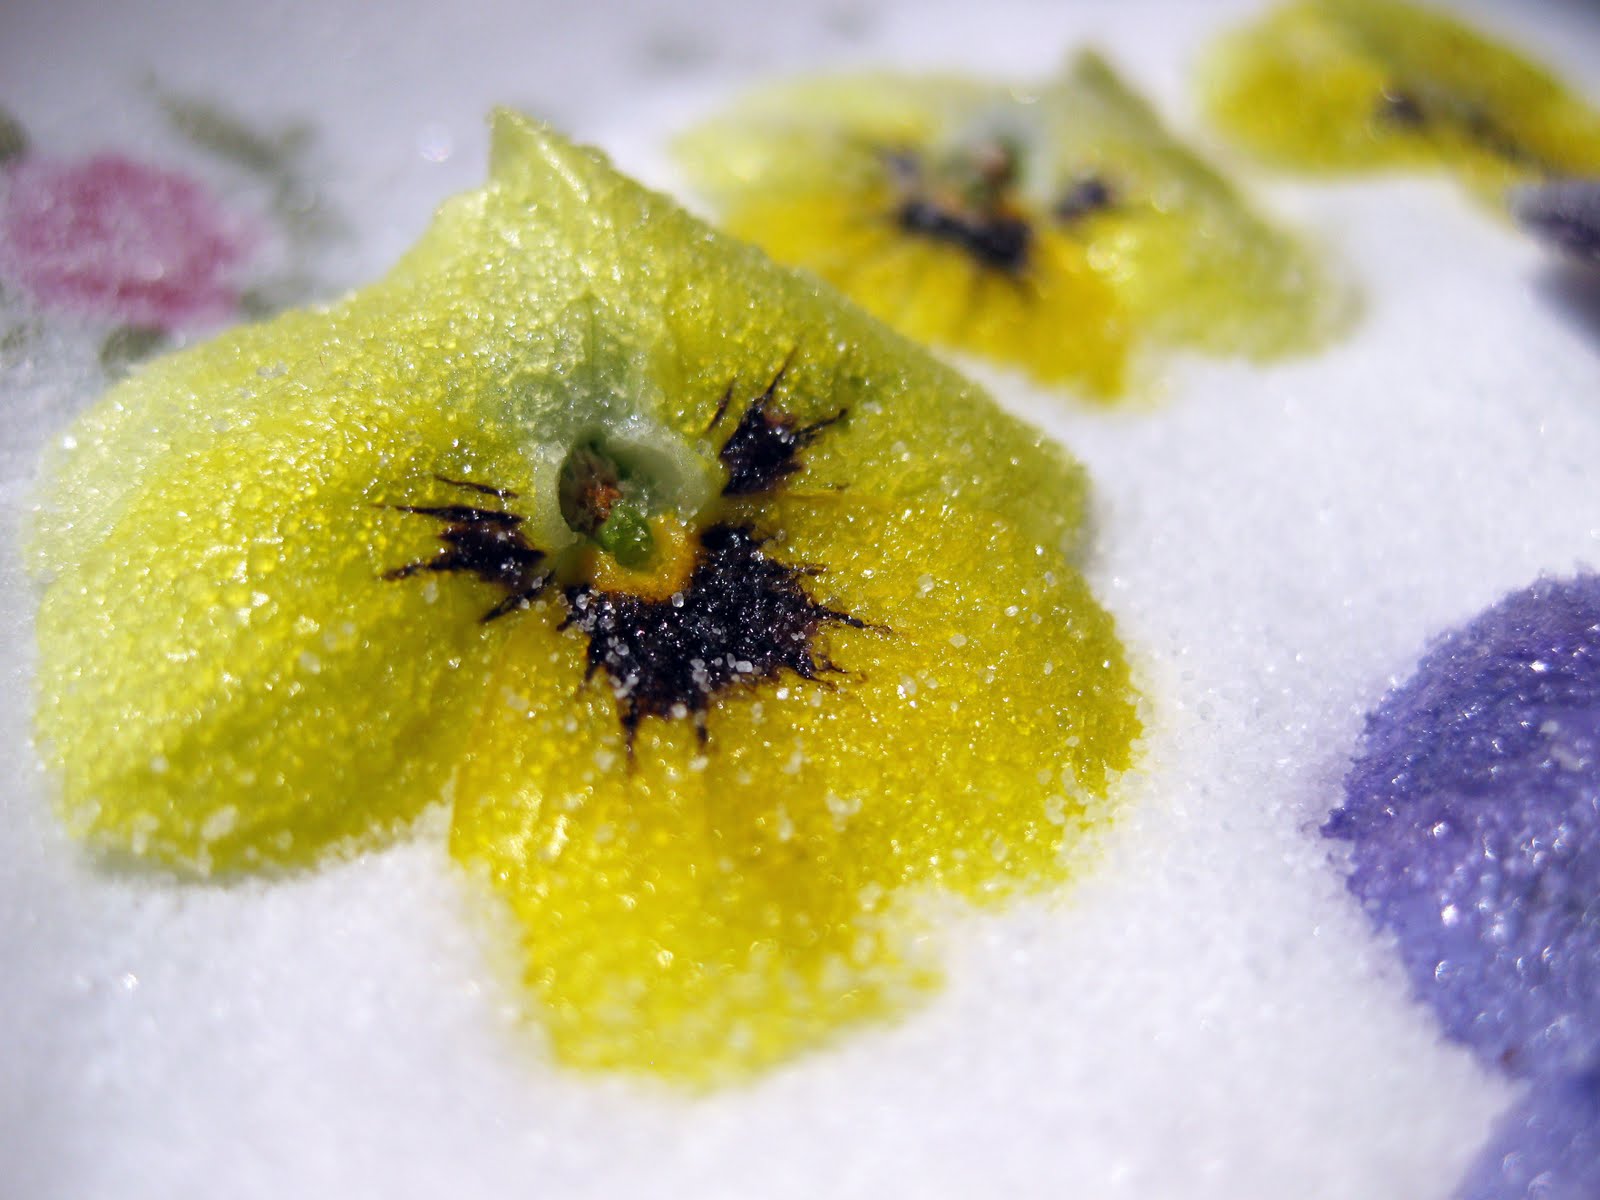 Crystallized Candy Edible Flowers